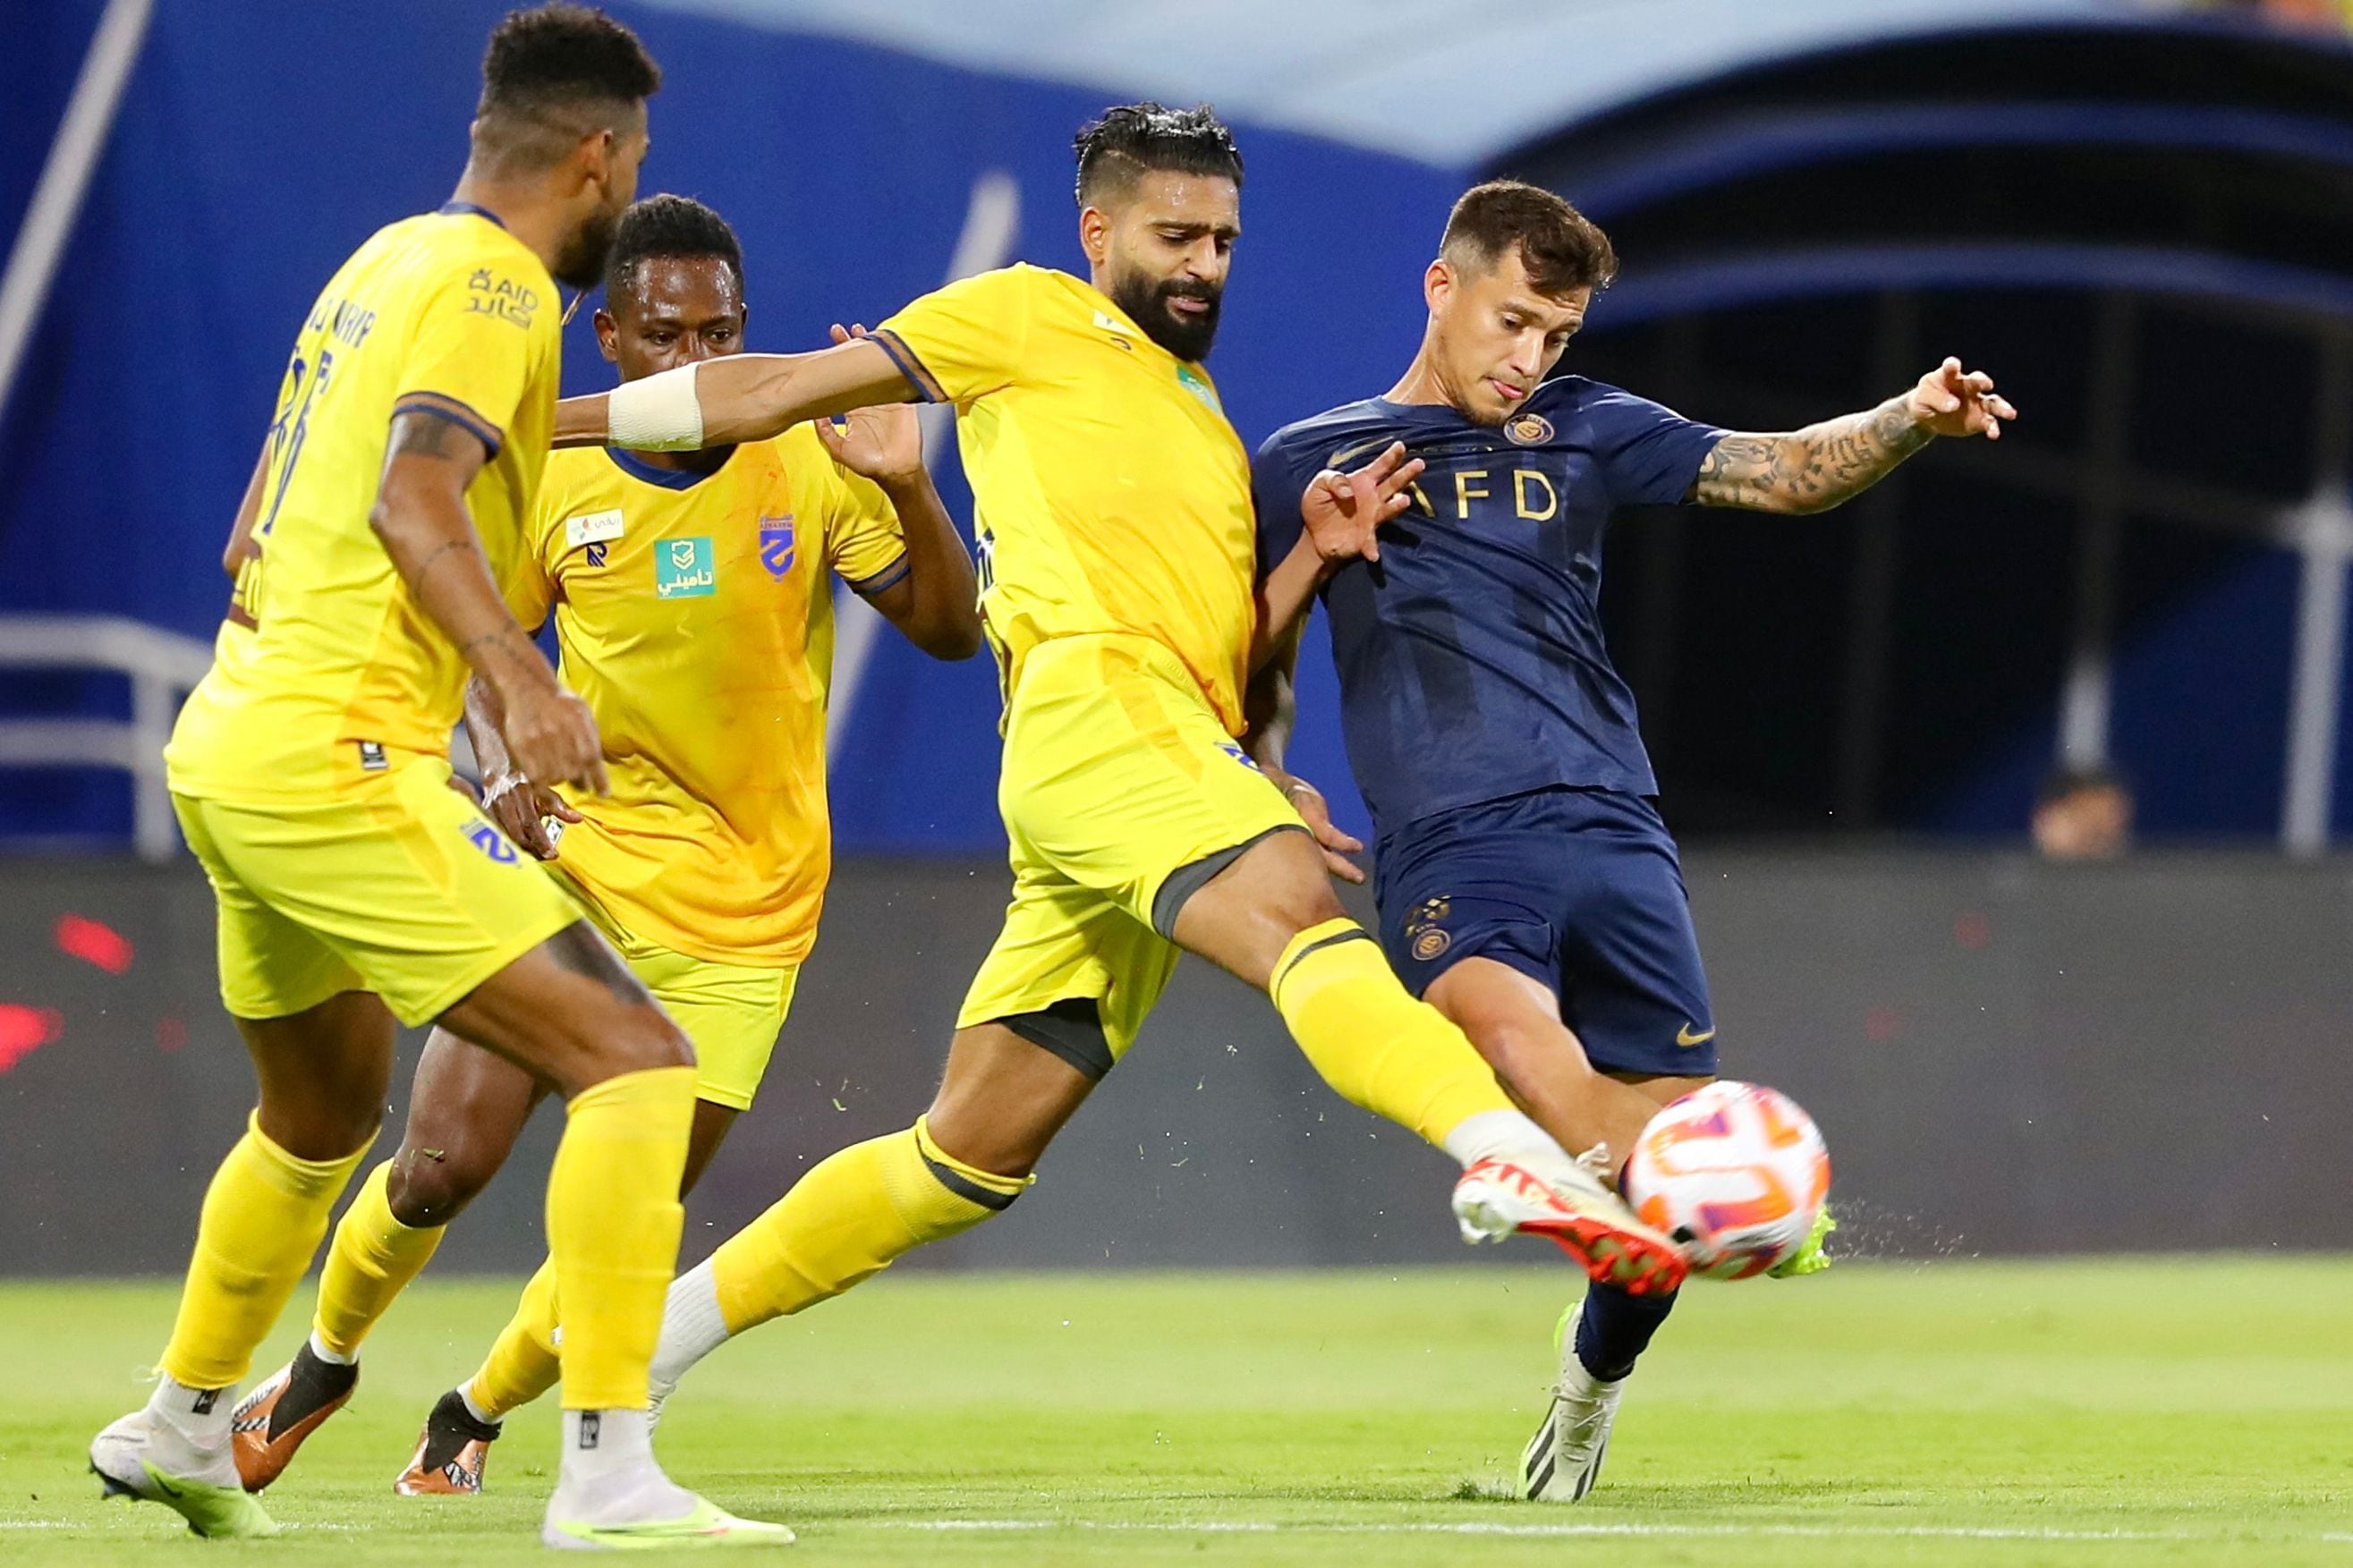 Al-Nassr vs Benfica, Club Friendly 2023 Live Streaming Online in India: How  To Watch Pre-Season Football Match Live Telecast On TV & Football Score  Updates in IST?